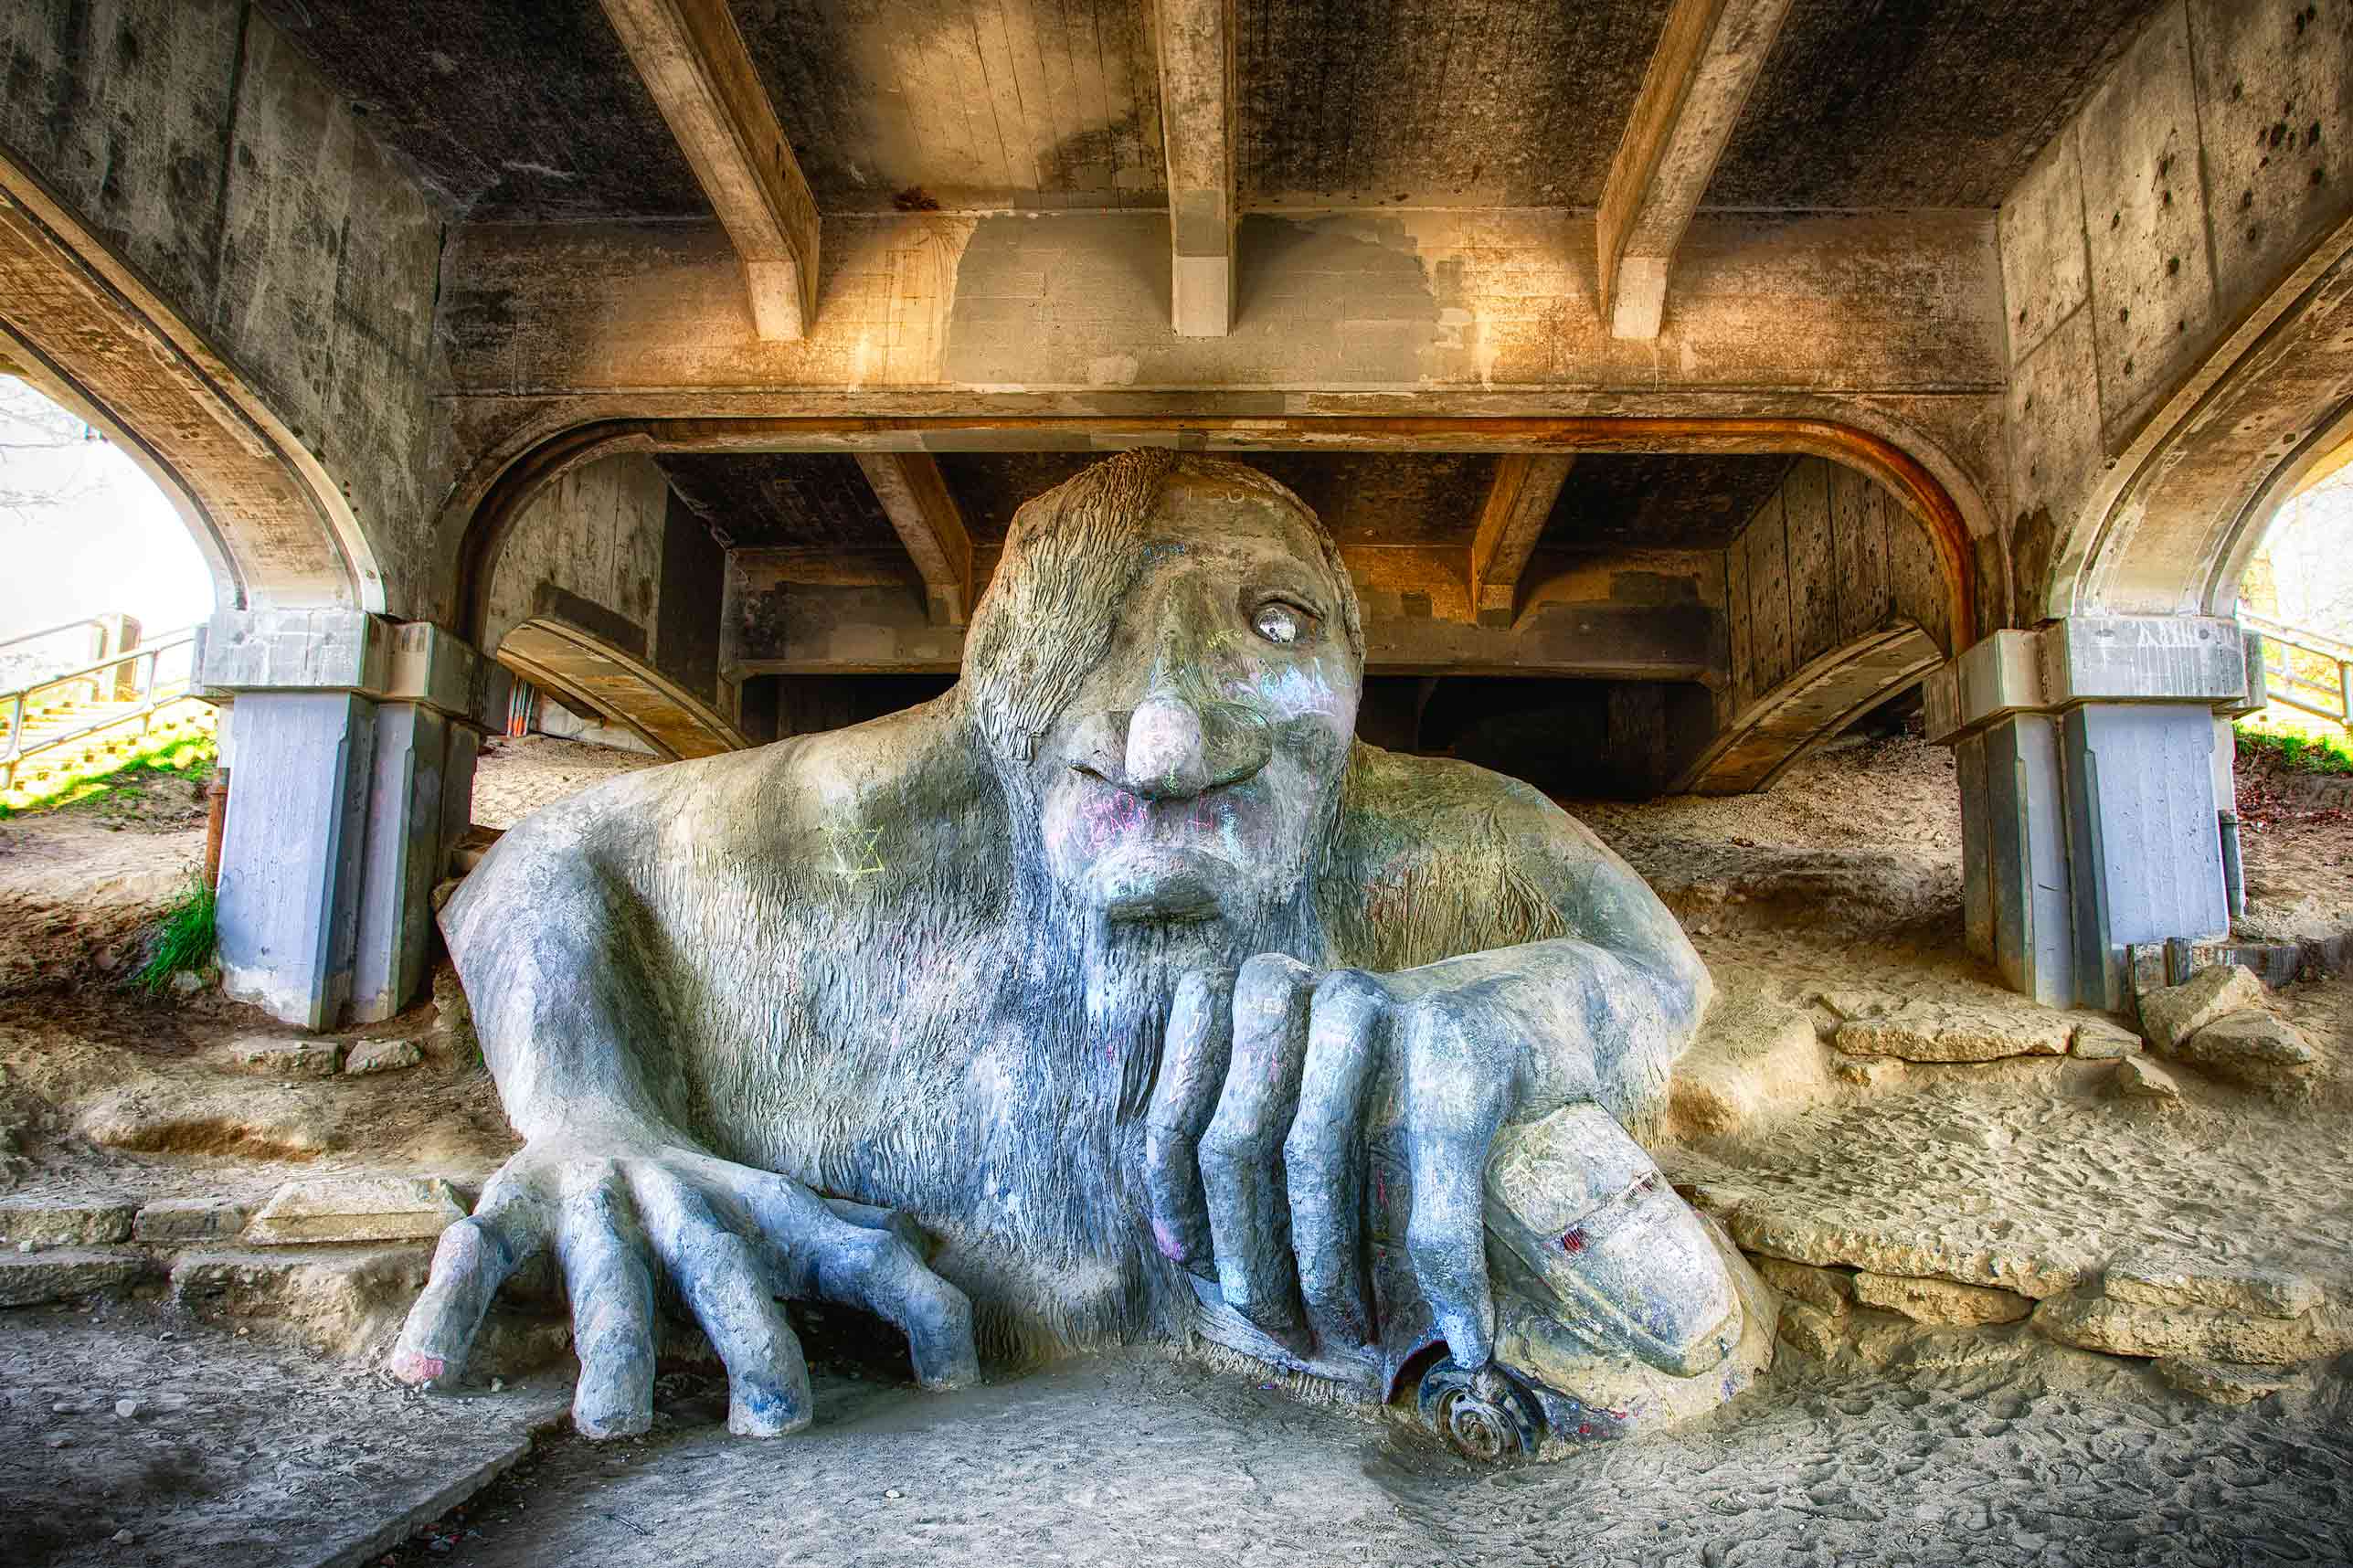 Visit the Fremont Troll, a unique and beloved piece of public art located in Seattle's vibrant Fremont area